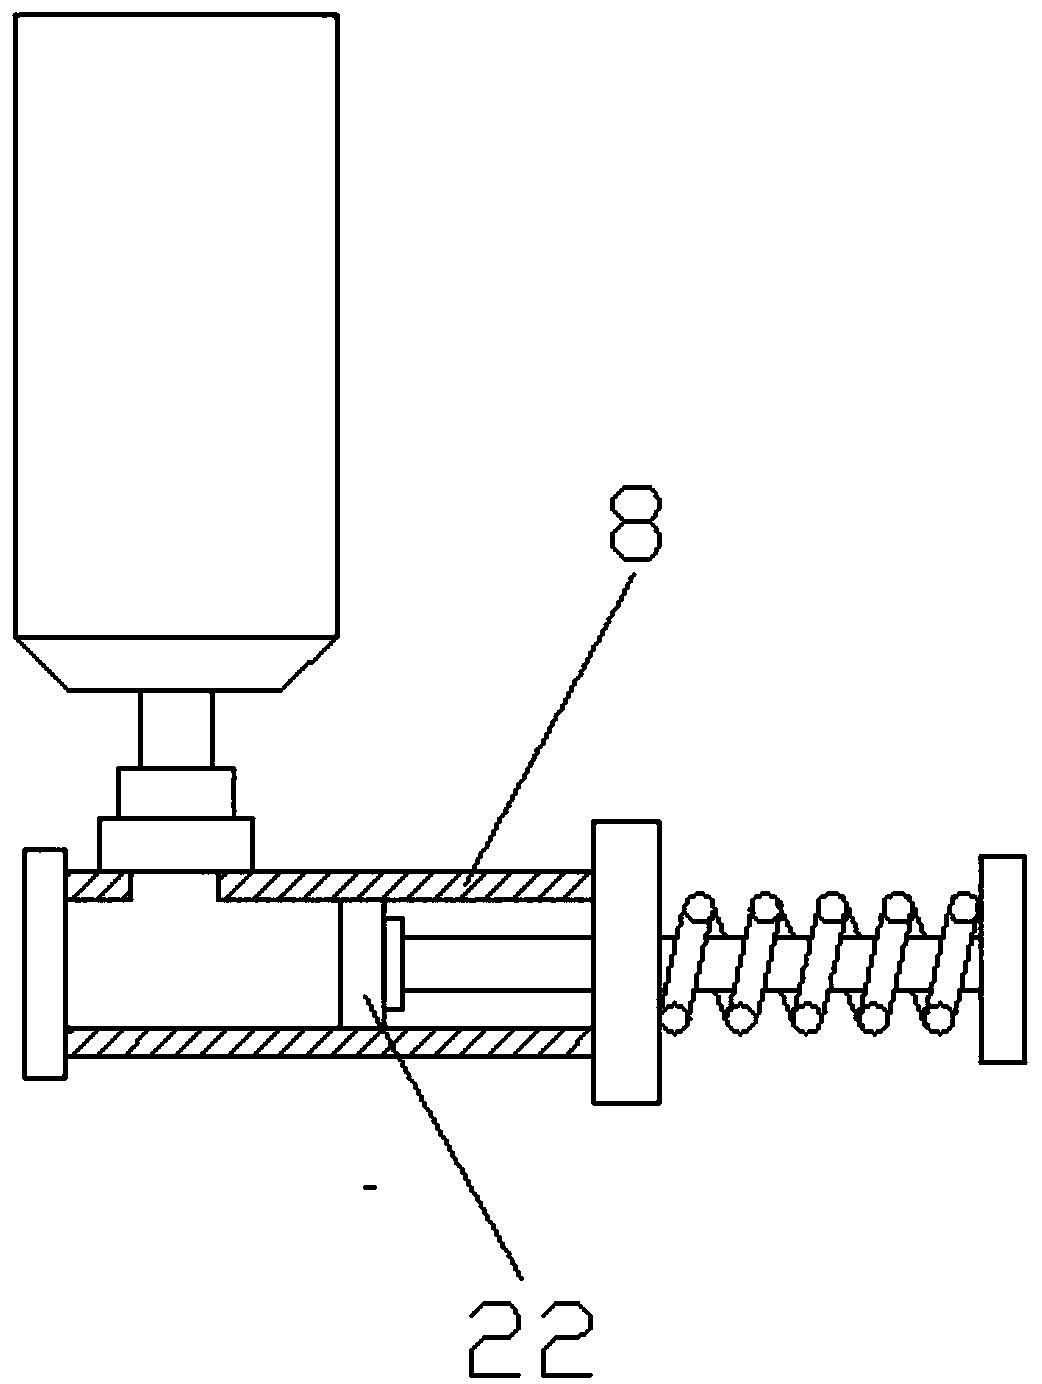 Roller coating device for valve parts